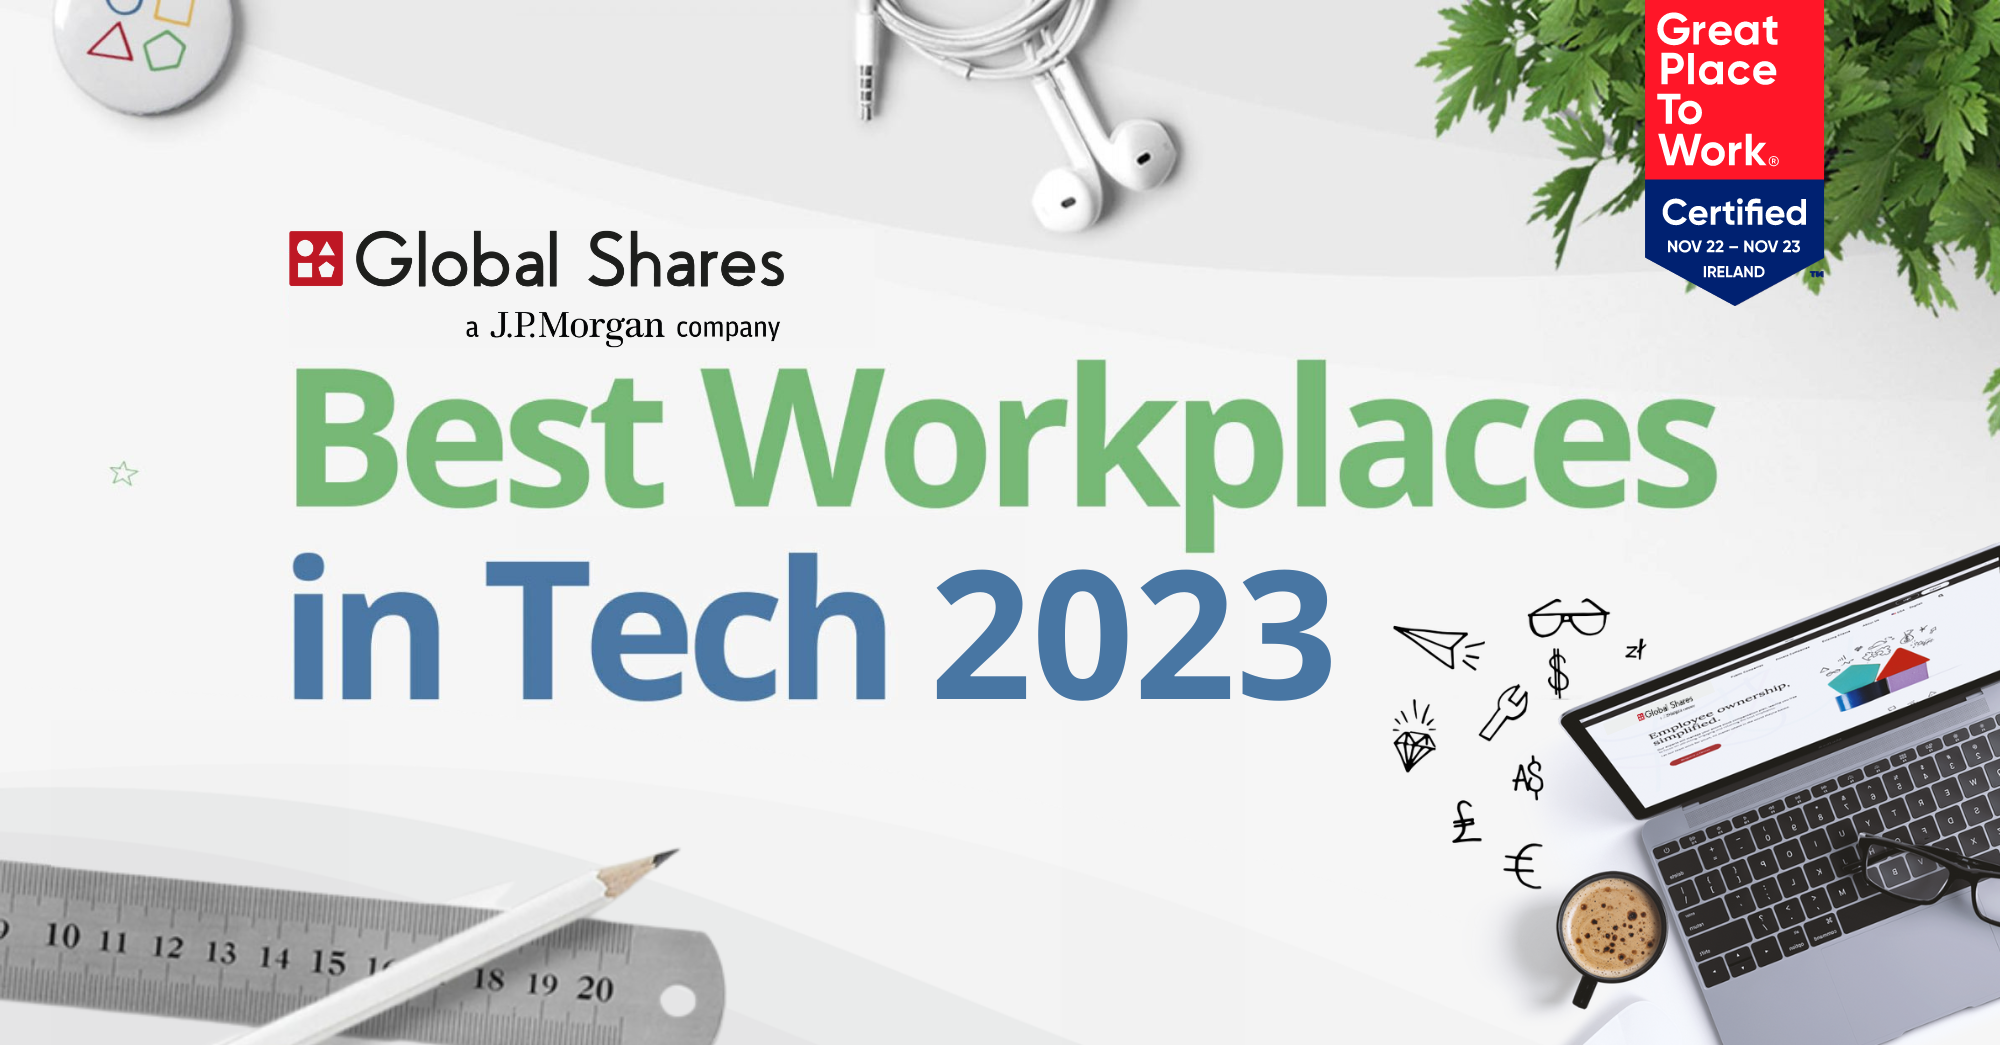 We’re a Best Workplace™ in Tech for the 3rd consecutive year